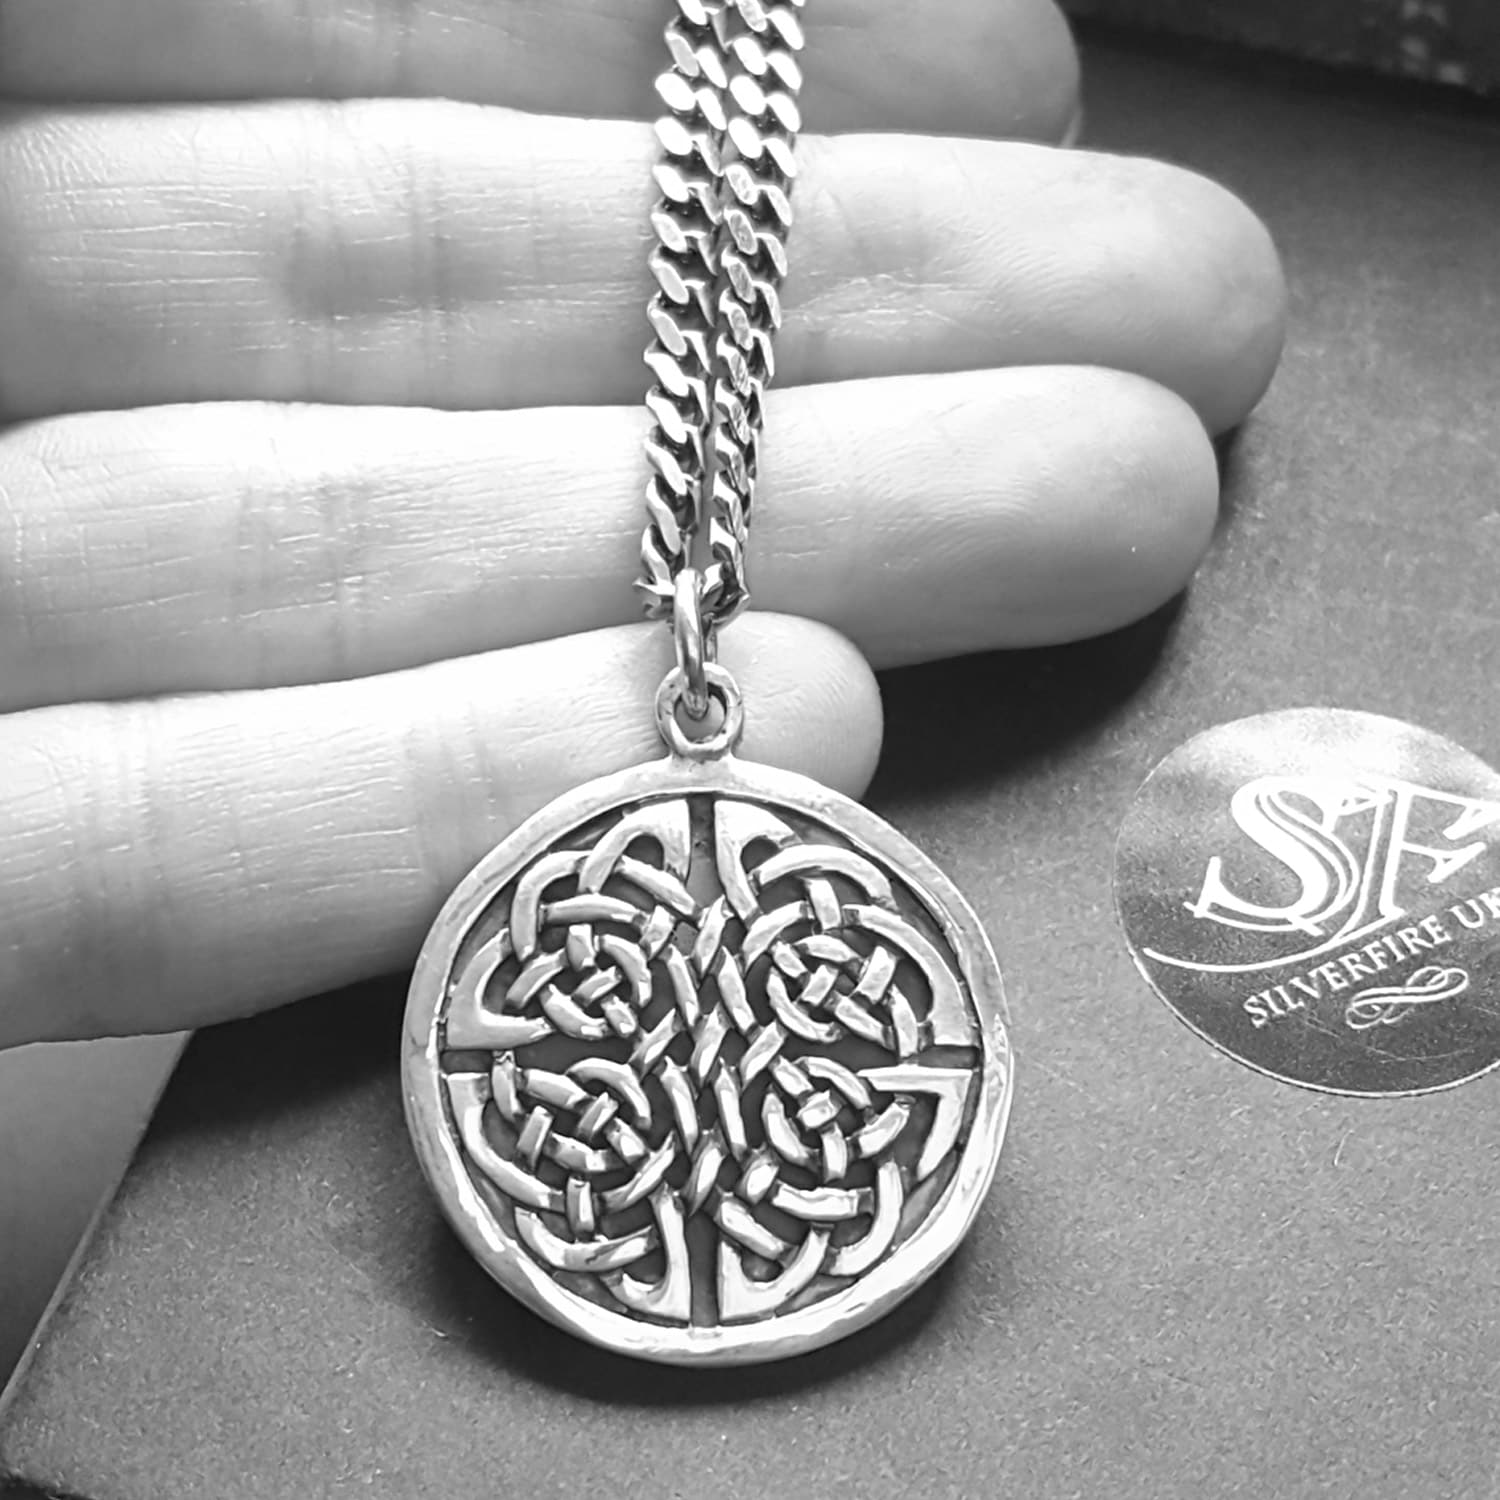 PROSTEEL Celtic Trinity Knot Necklace for Men Stainless Steel Vintage Black  Pendant Chains Neck Charms Amulet Irish Jewelry Gift - Walmart.com